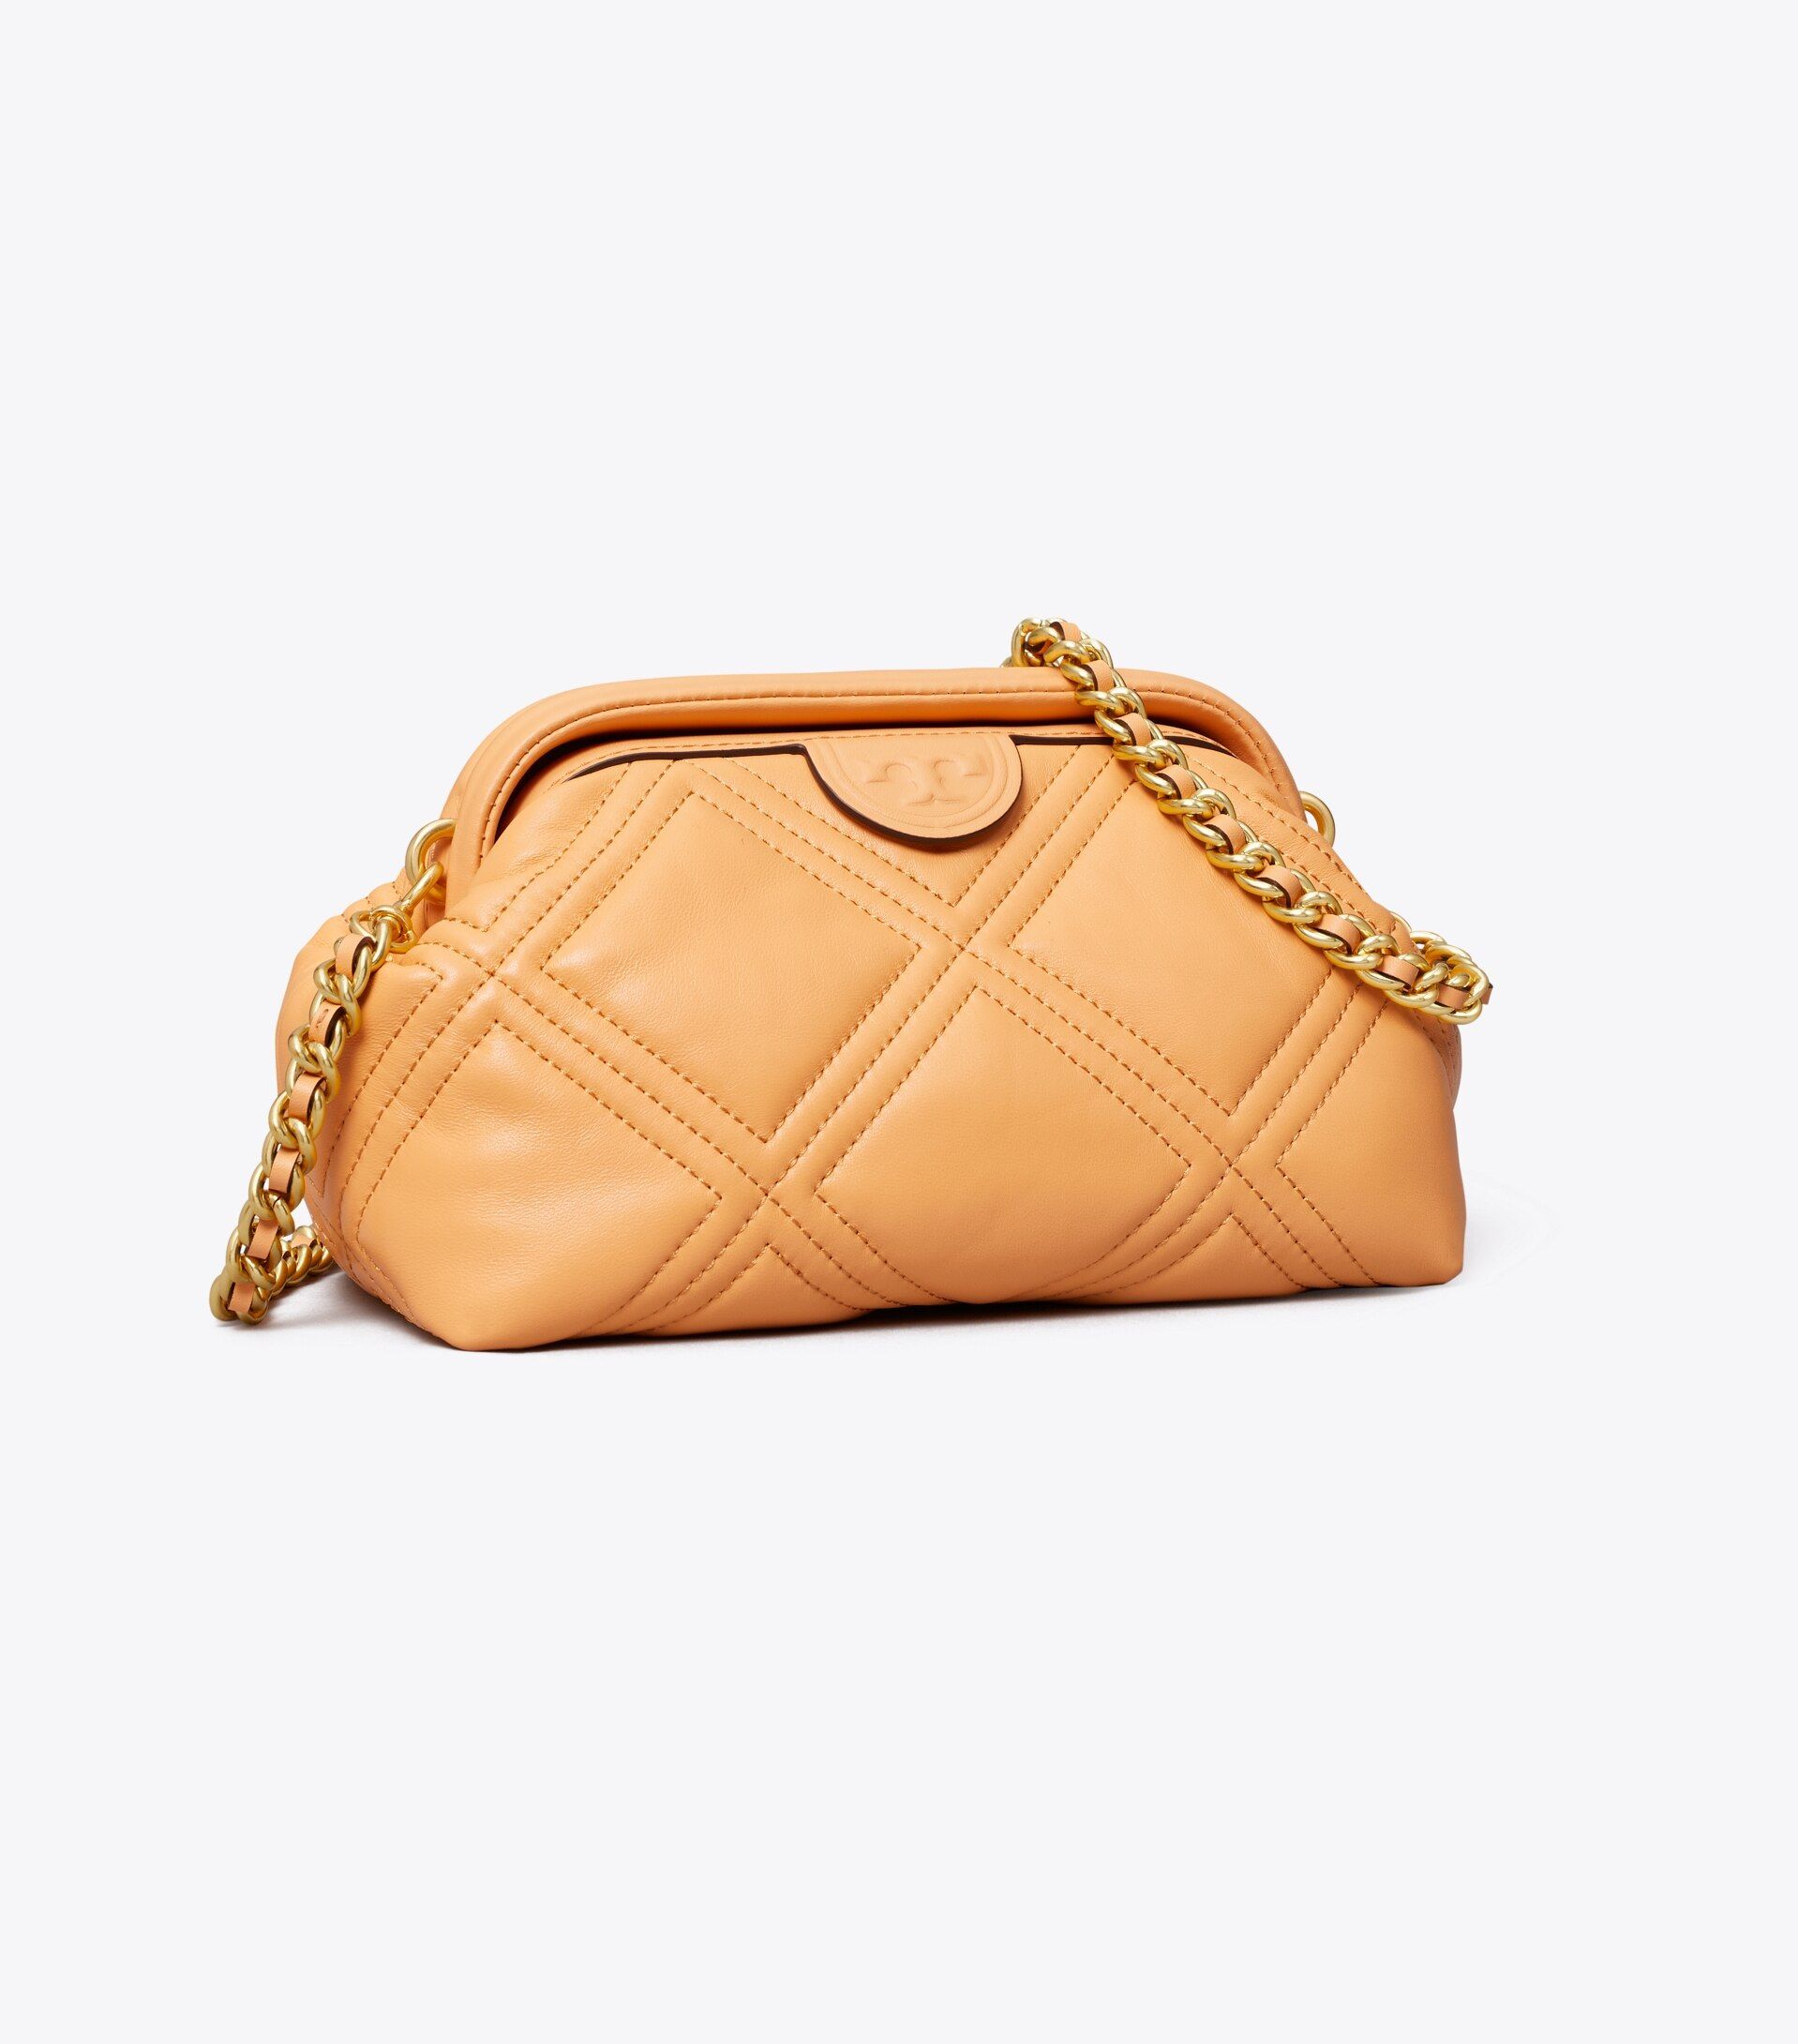 $315 with 25% off | Tory Burch (US)